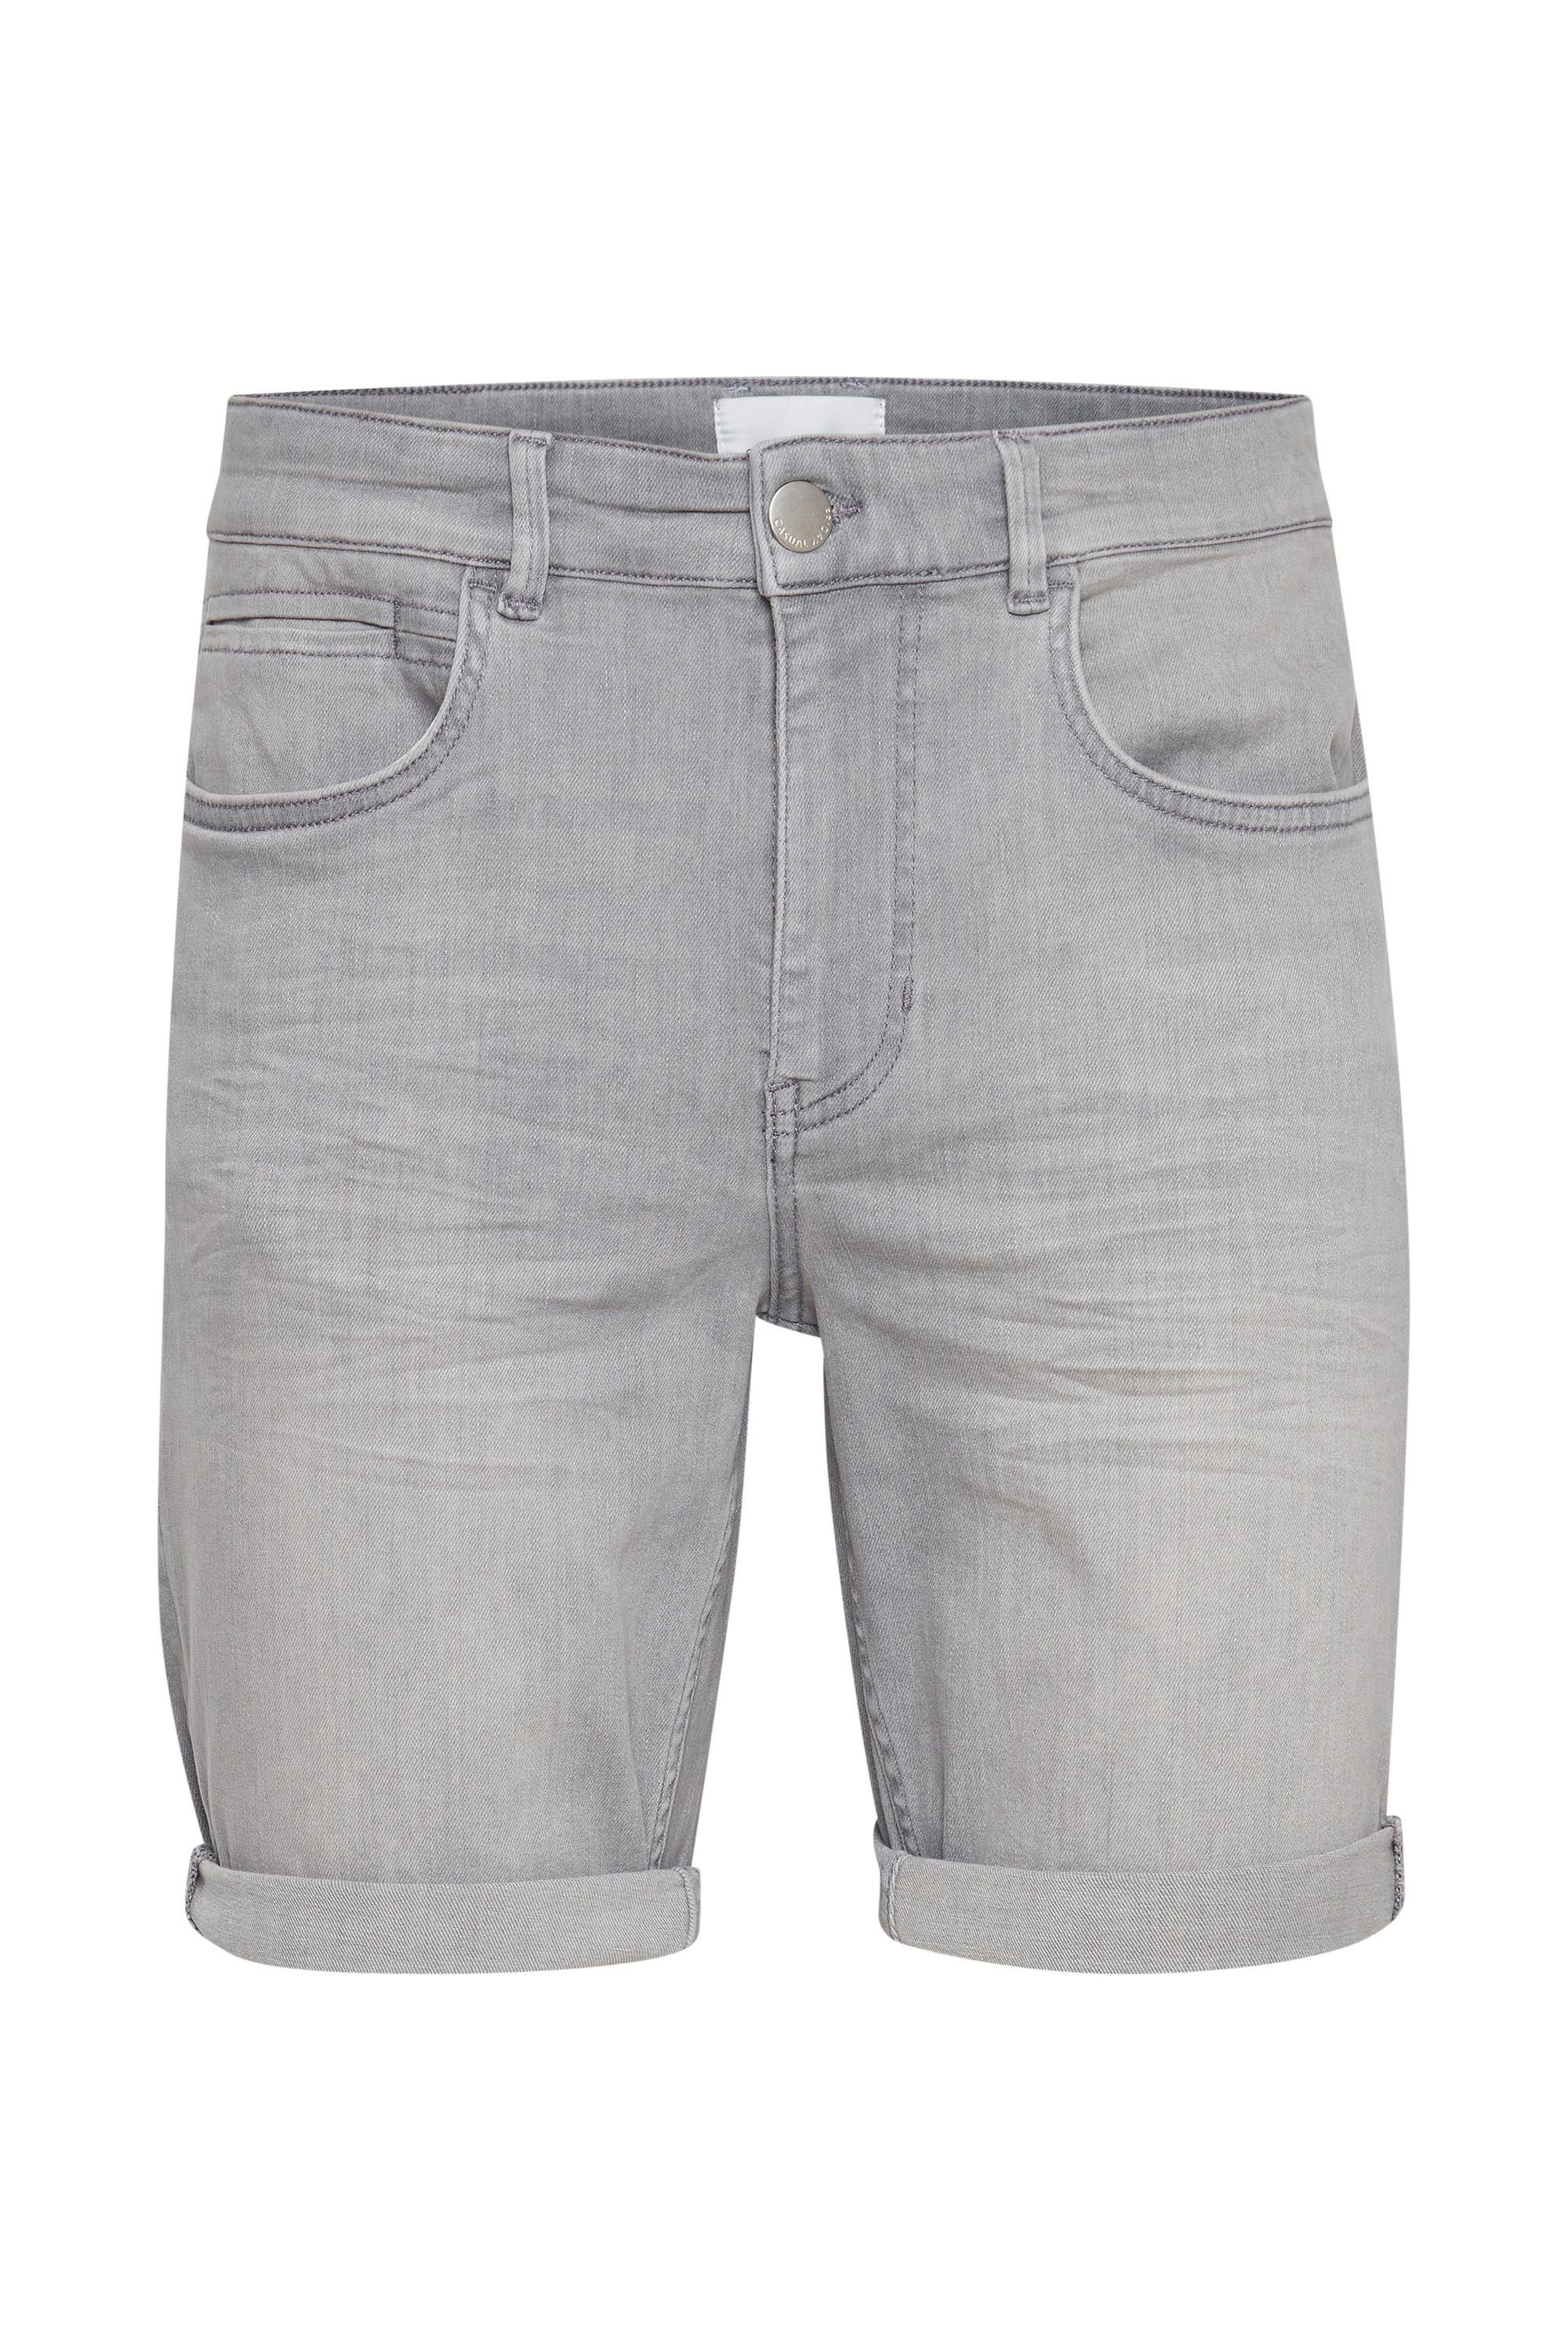 Friday - 20504124 Jeansshorts lava Casual CFRY Denim grey (201124)